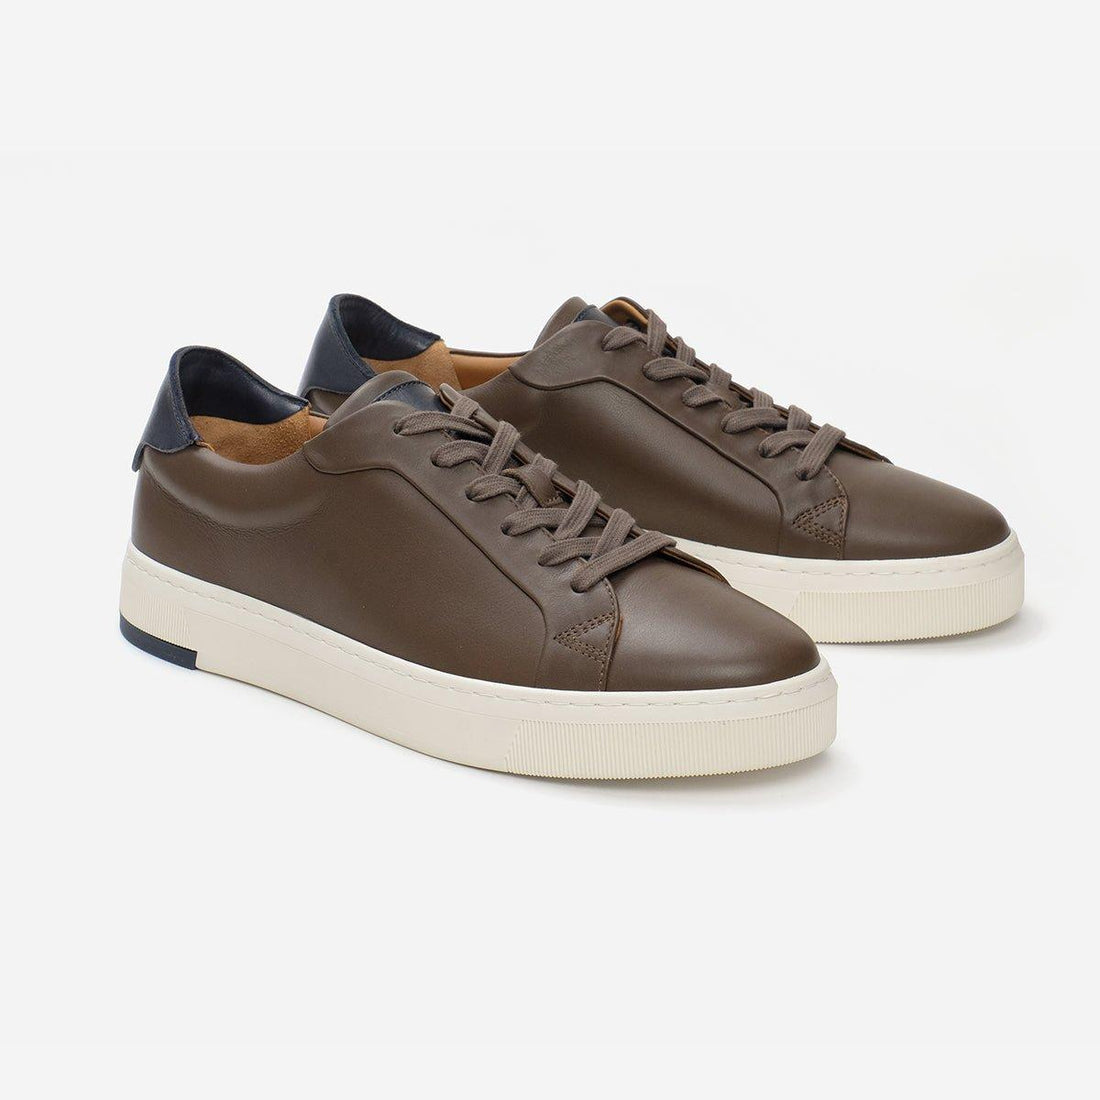 Seven leather trainer brands you need to know about - Real Leather ...